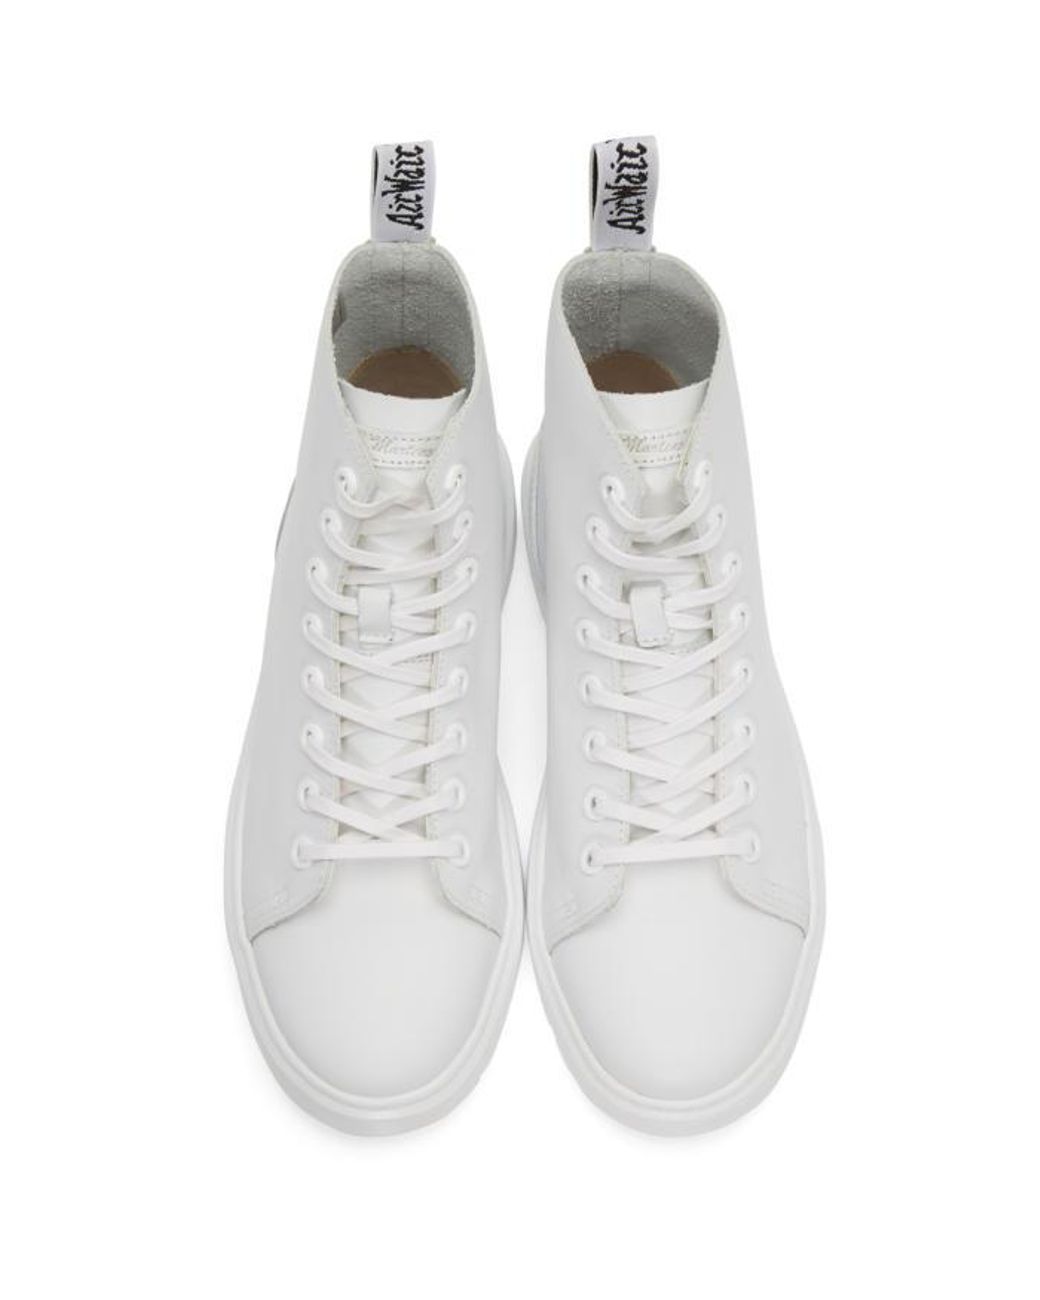 Dr. Martens Leather White Talib Boots for Men | Lyst